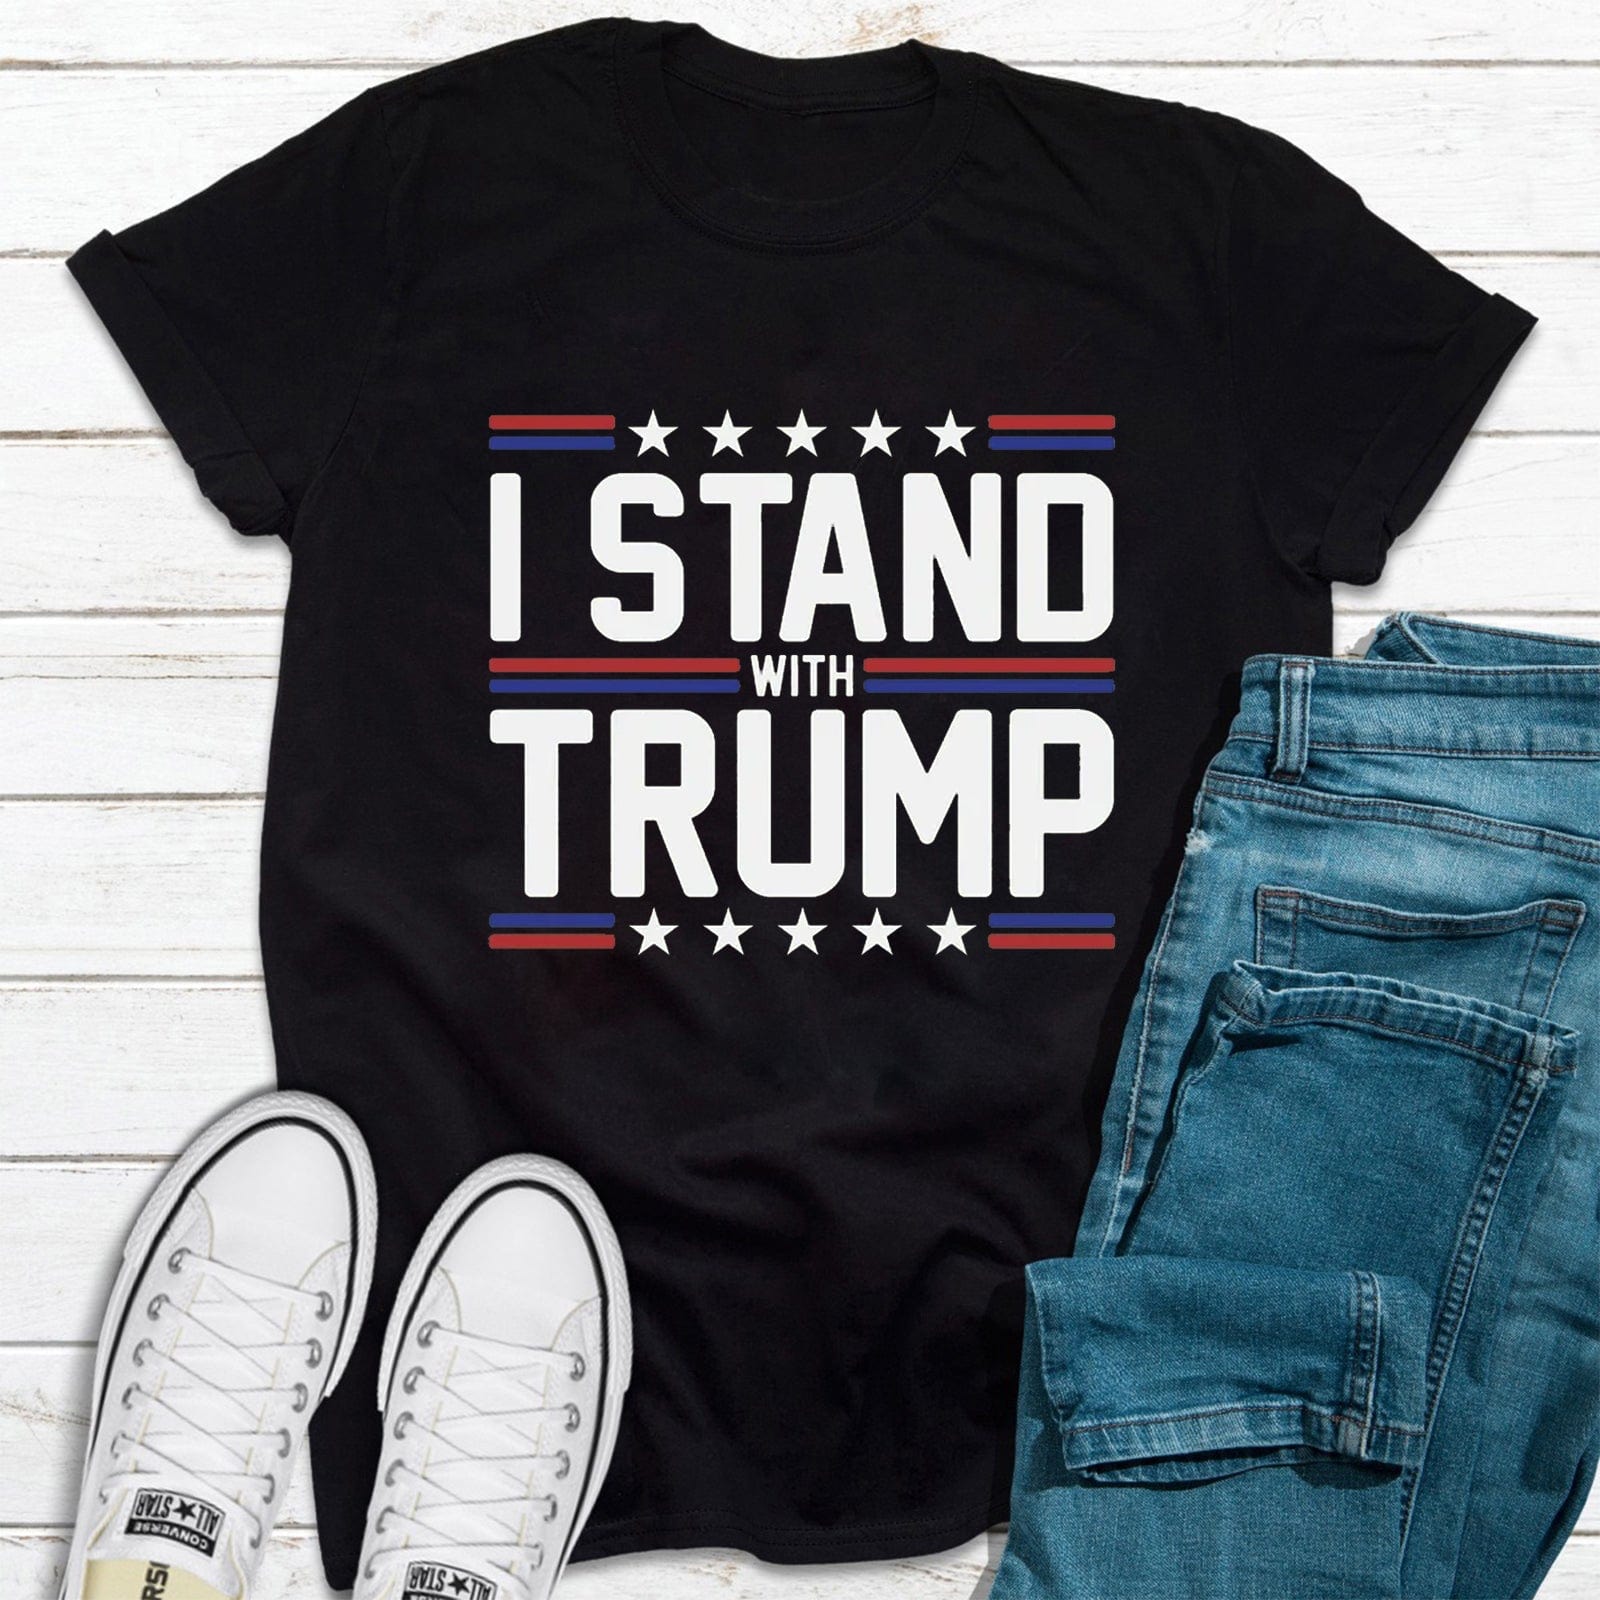 I Stand With Trump Shirts For Trump'fan